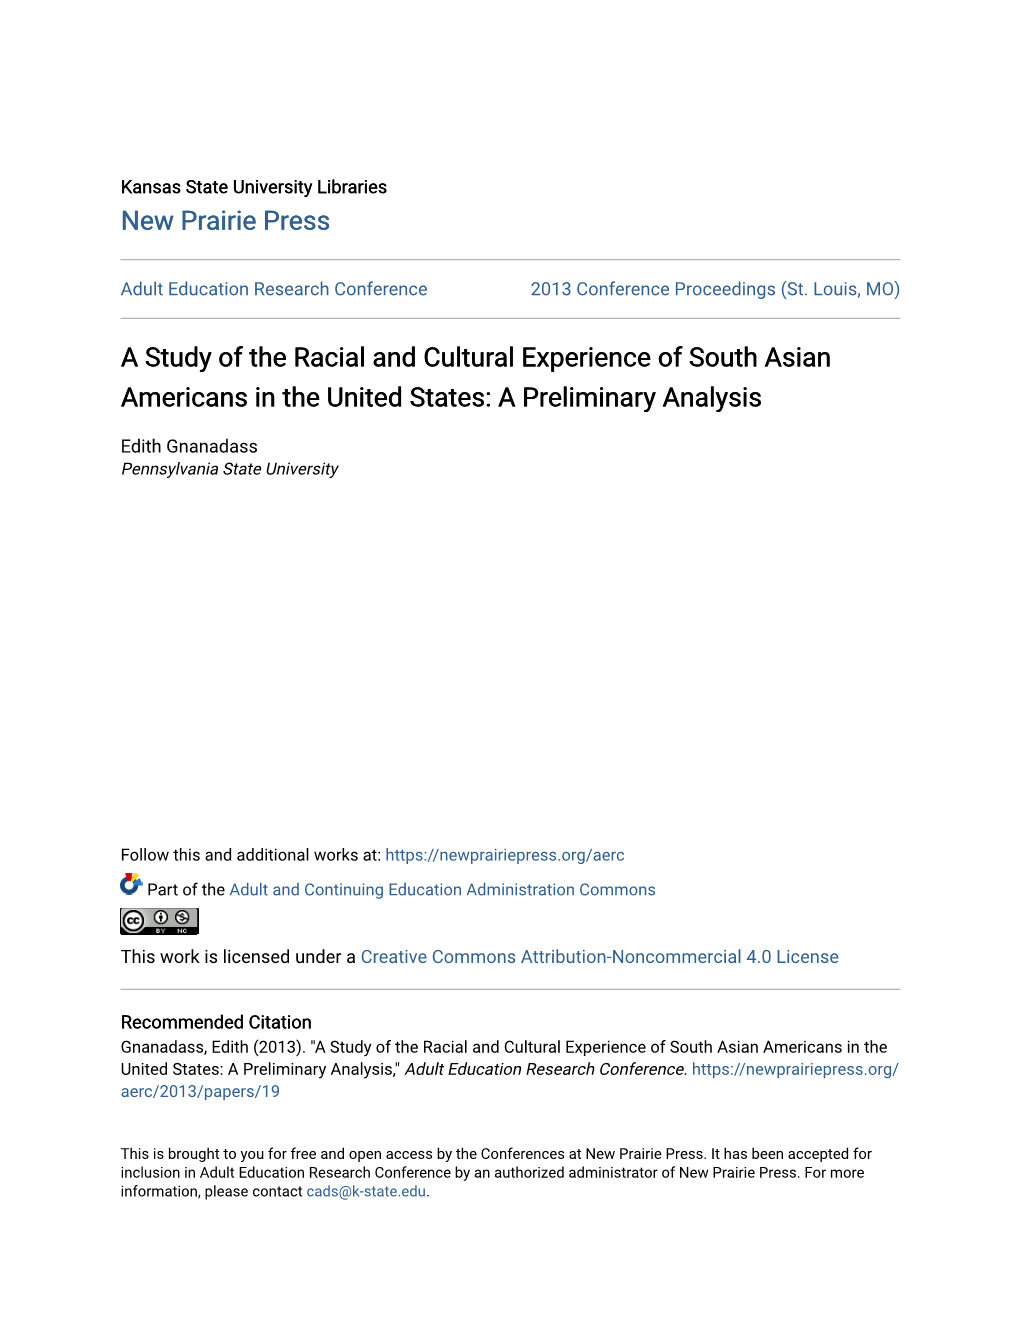 A Study of the Racial and Cultural Experience of South Asian Americans in the United States: a Preliminary Analysis